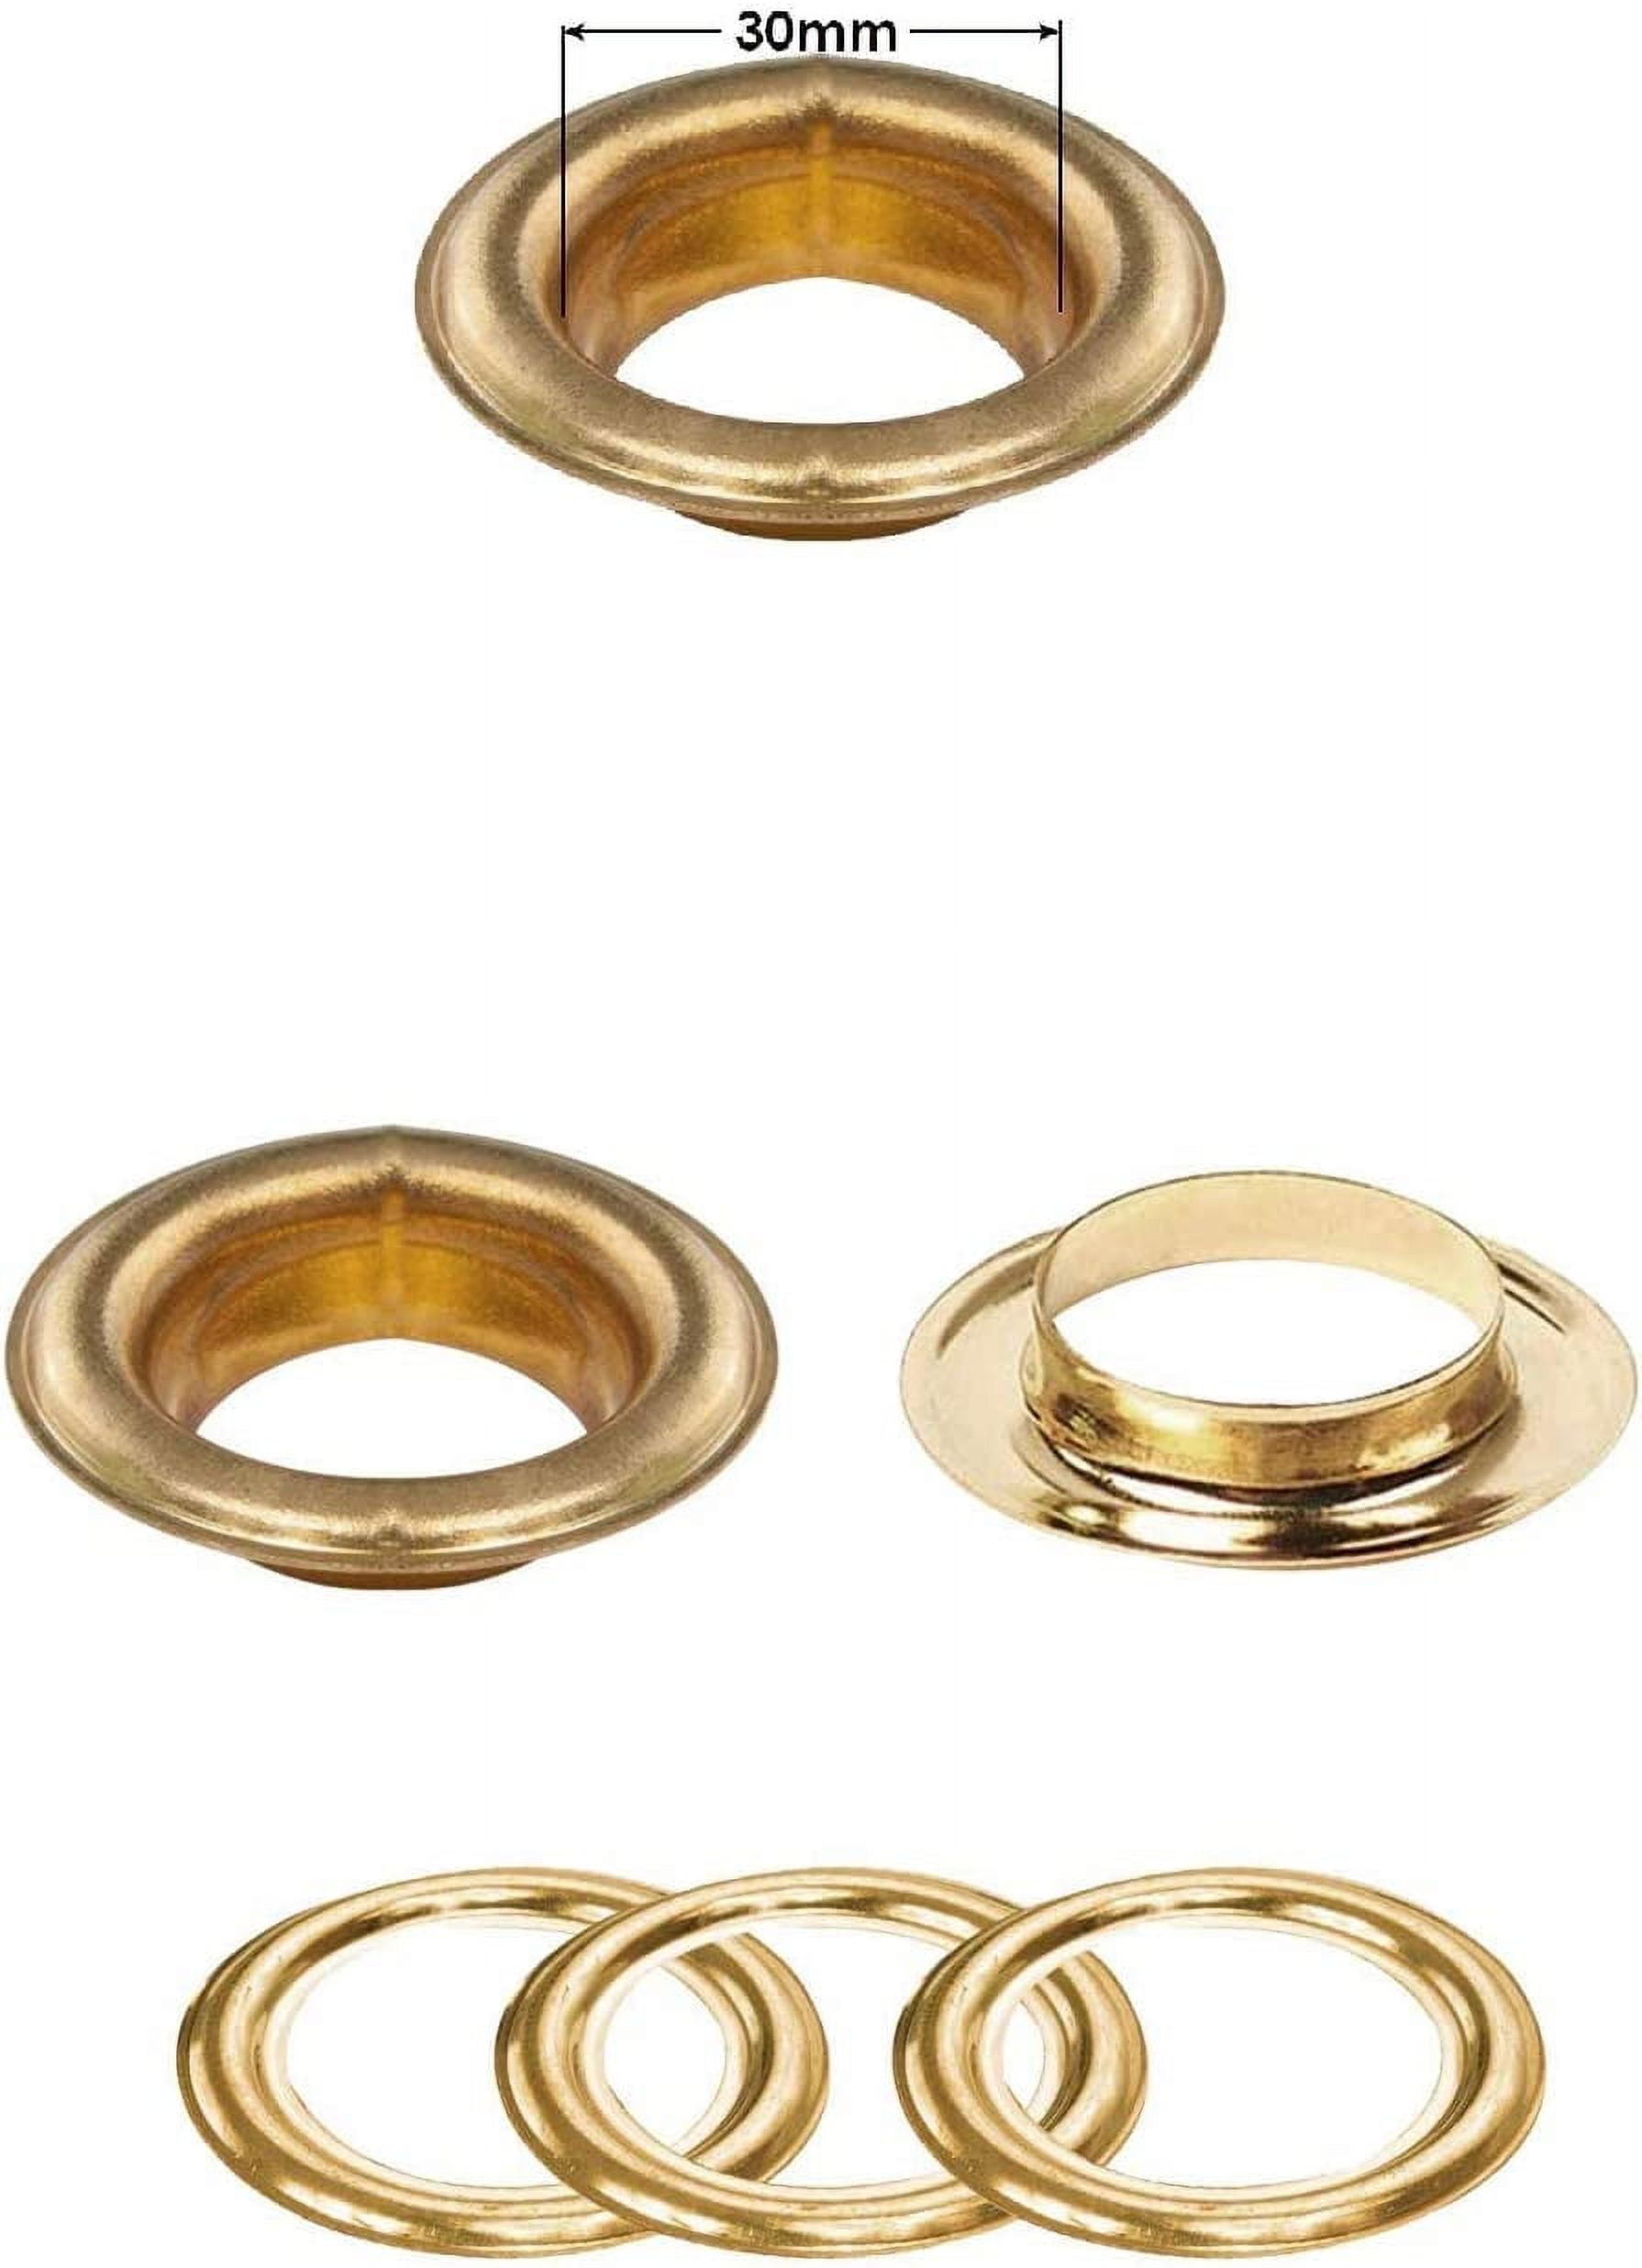 Trimming Shop 30mm Rose Gold Brass Eyelets with Washers, Rust Proof  Grommets, 10pcs